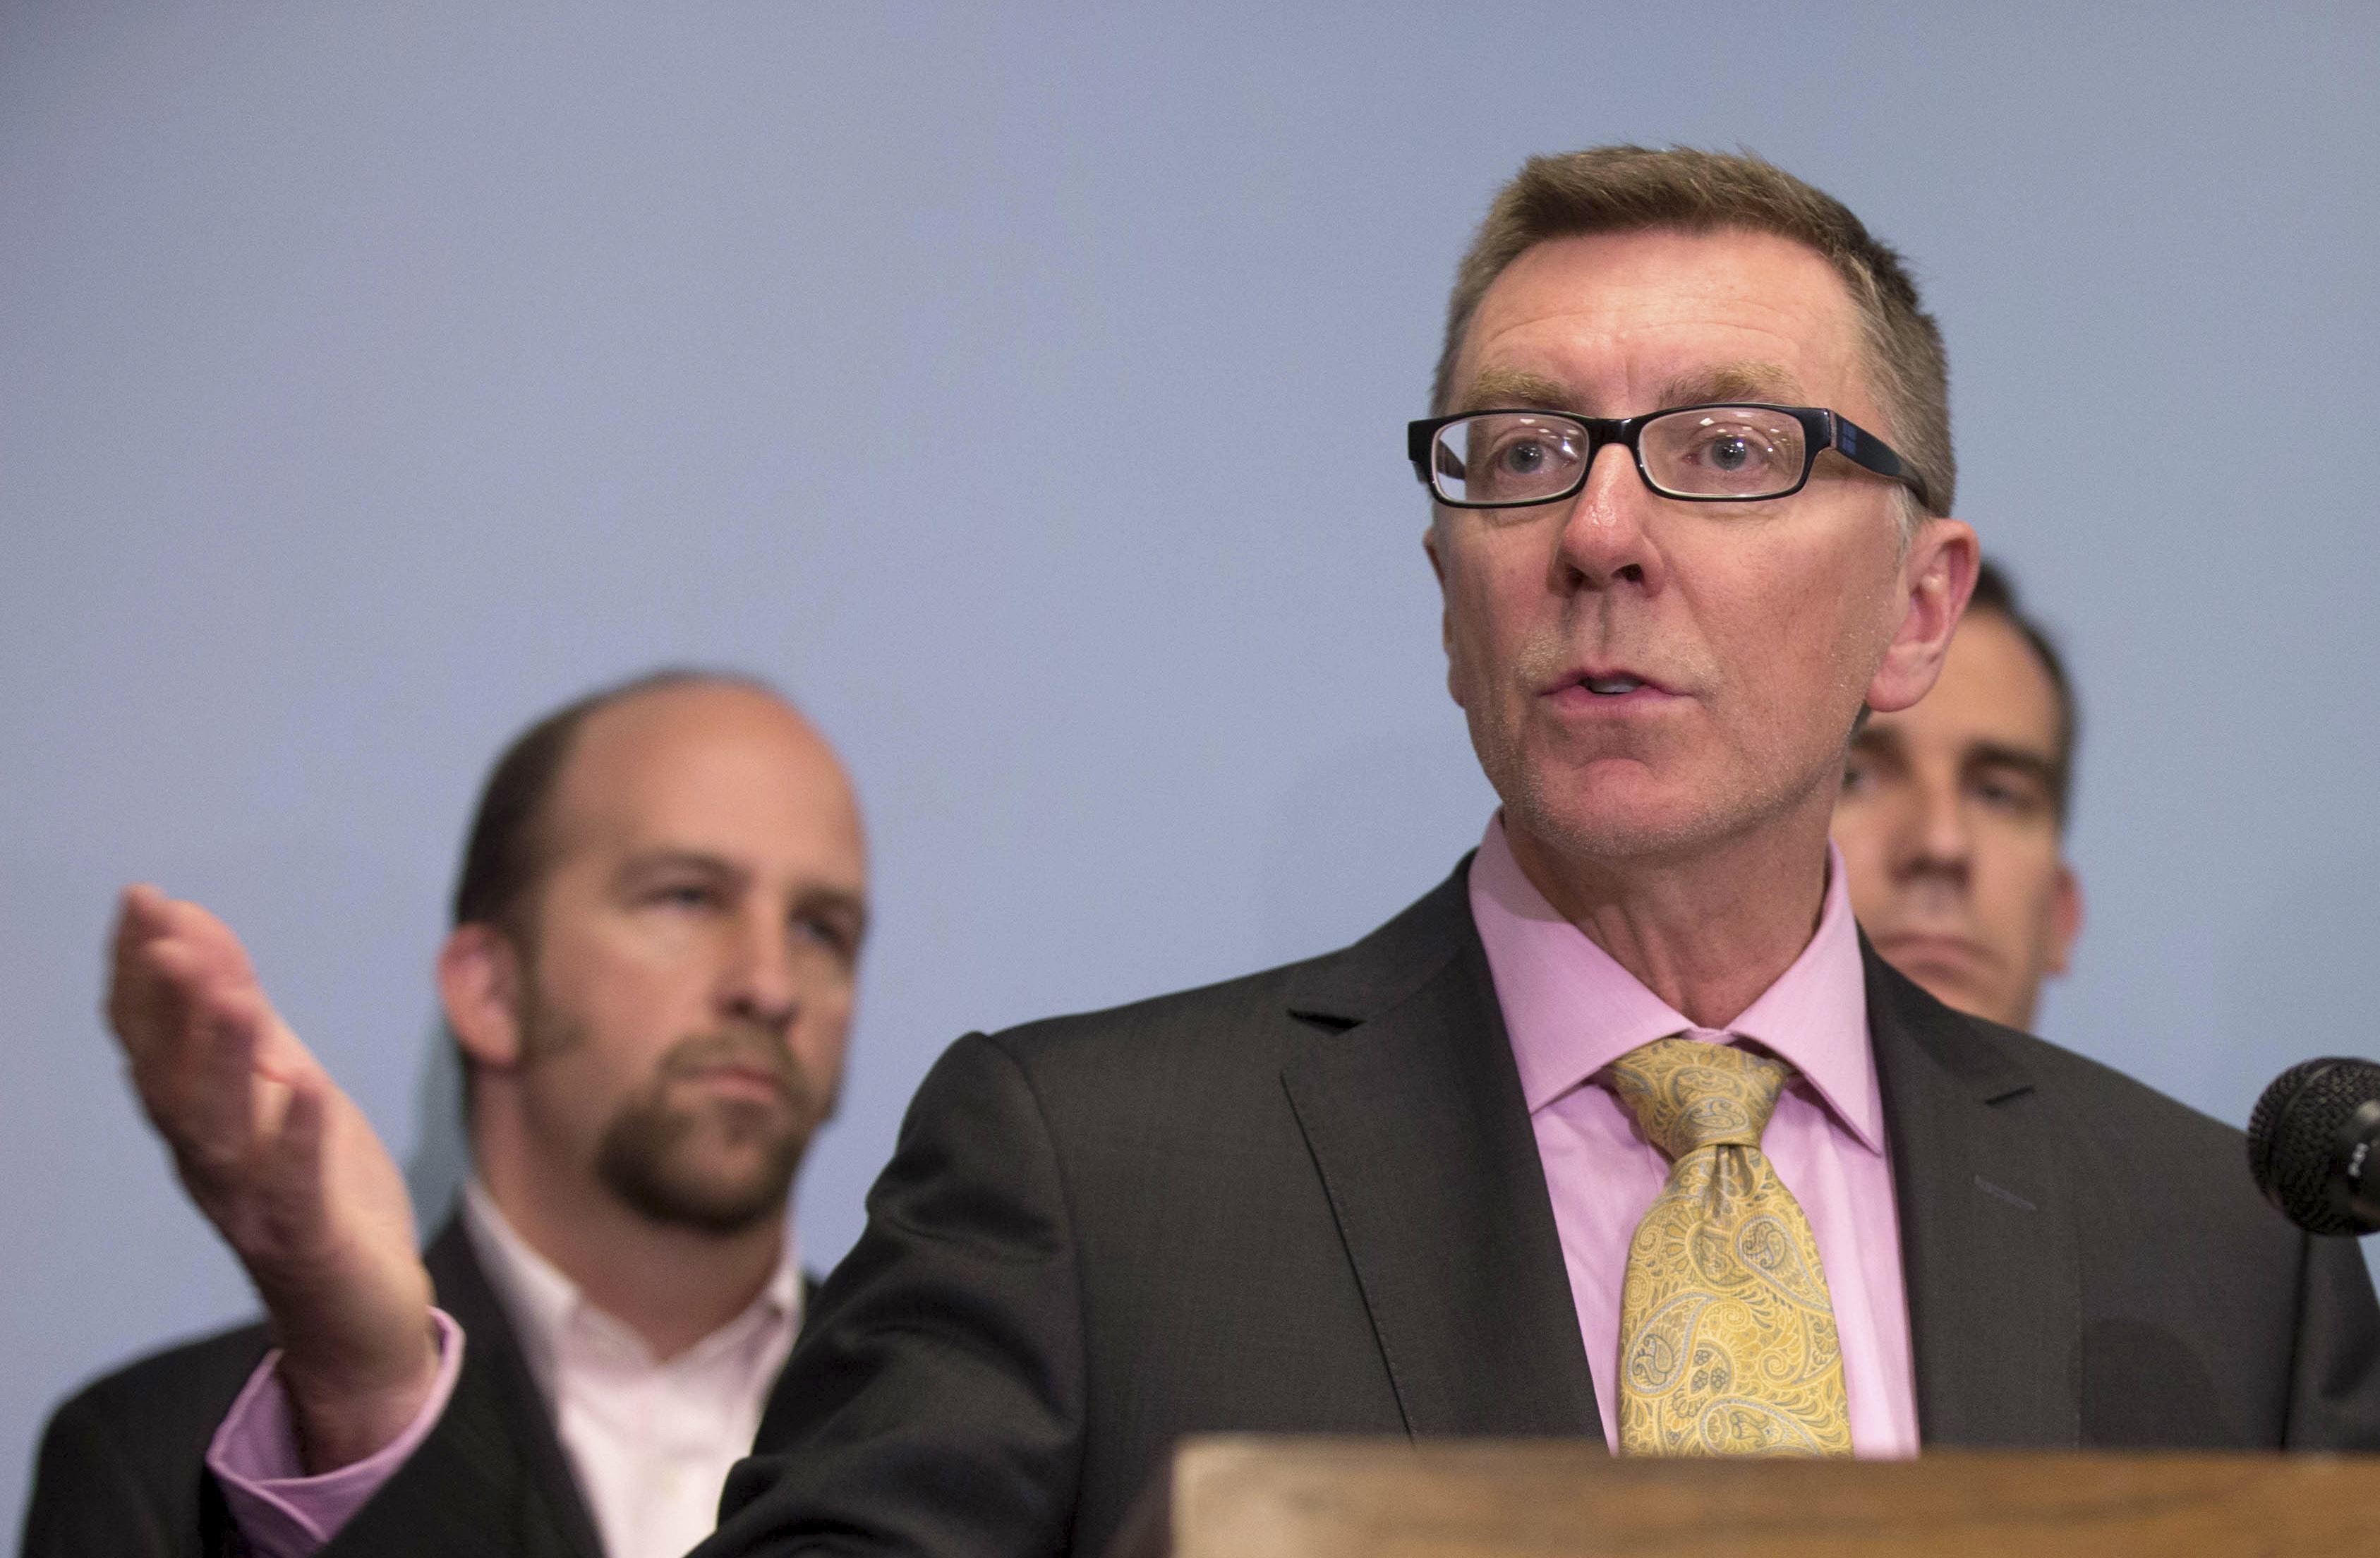 Los Angeles Unified School District Superintendent John Deasy speaks at a news conference in Los Angeles on April 11, 2014.